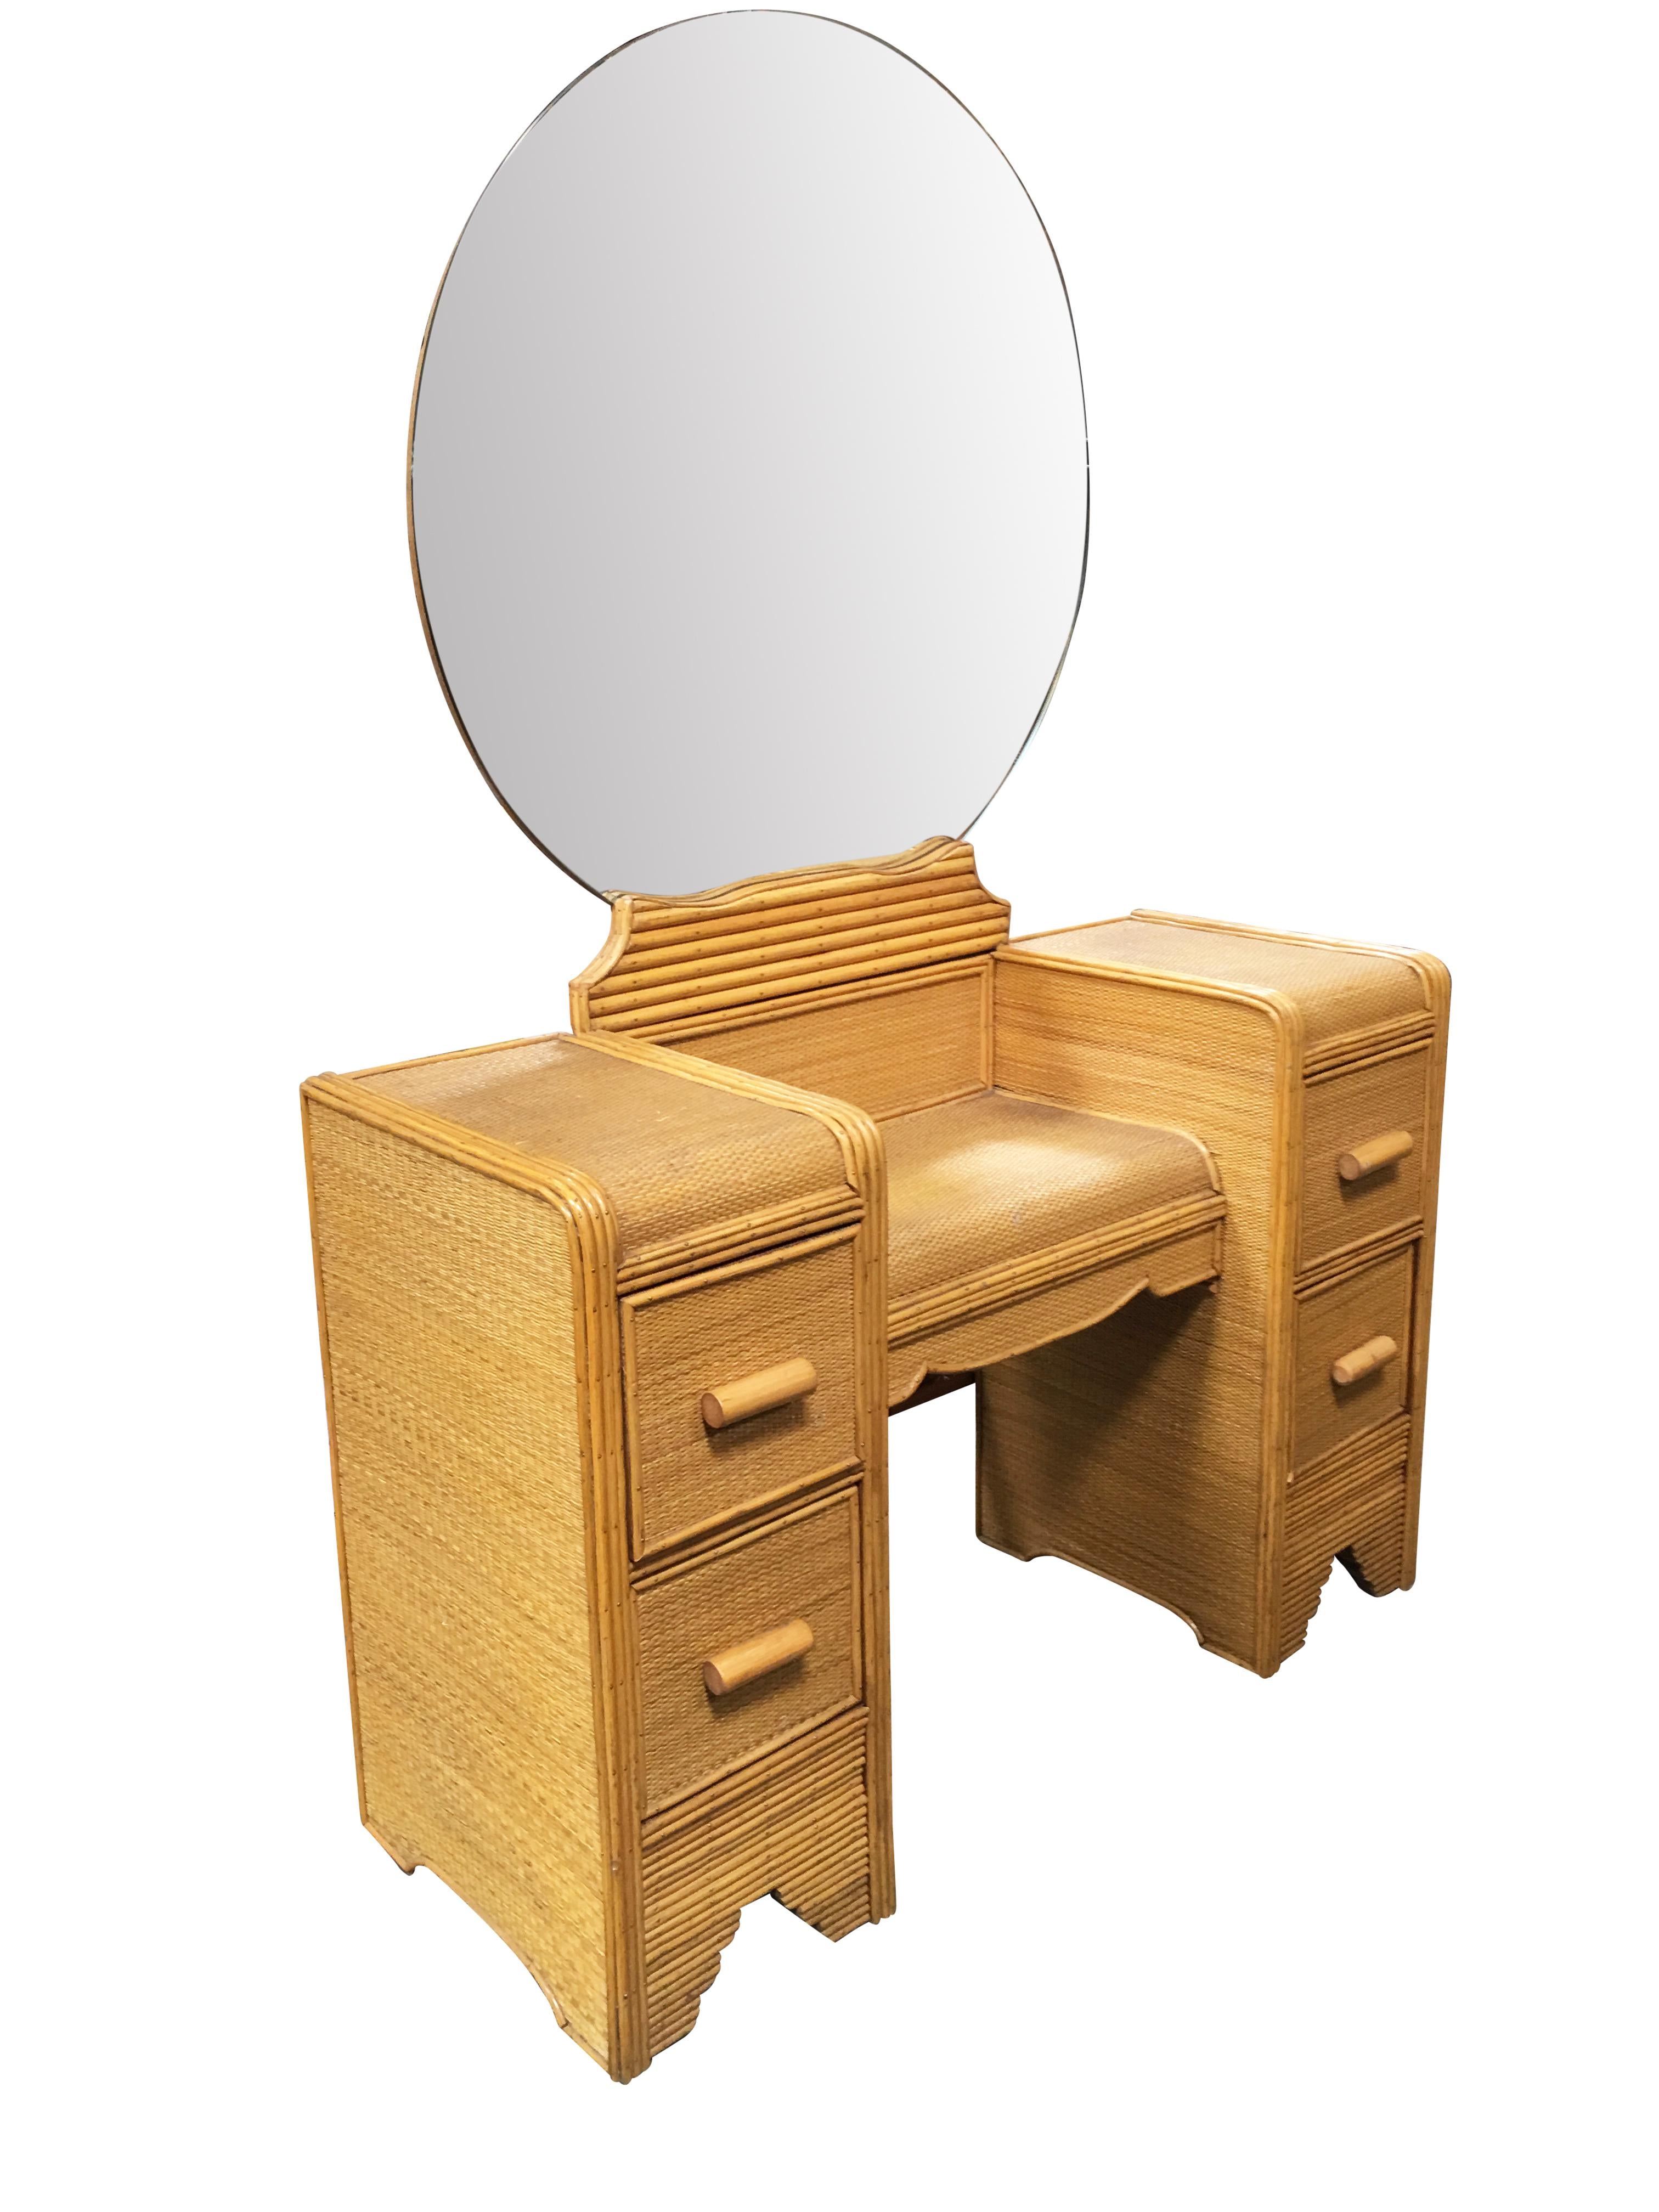 Stick rattan vanity with woven rice mat coverings and round rattan mirror. The vanity features decorative nail heads, larger vanity mirror and four side pull out drawers. 

Measurements: 55